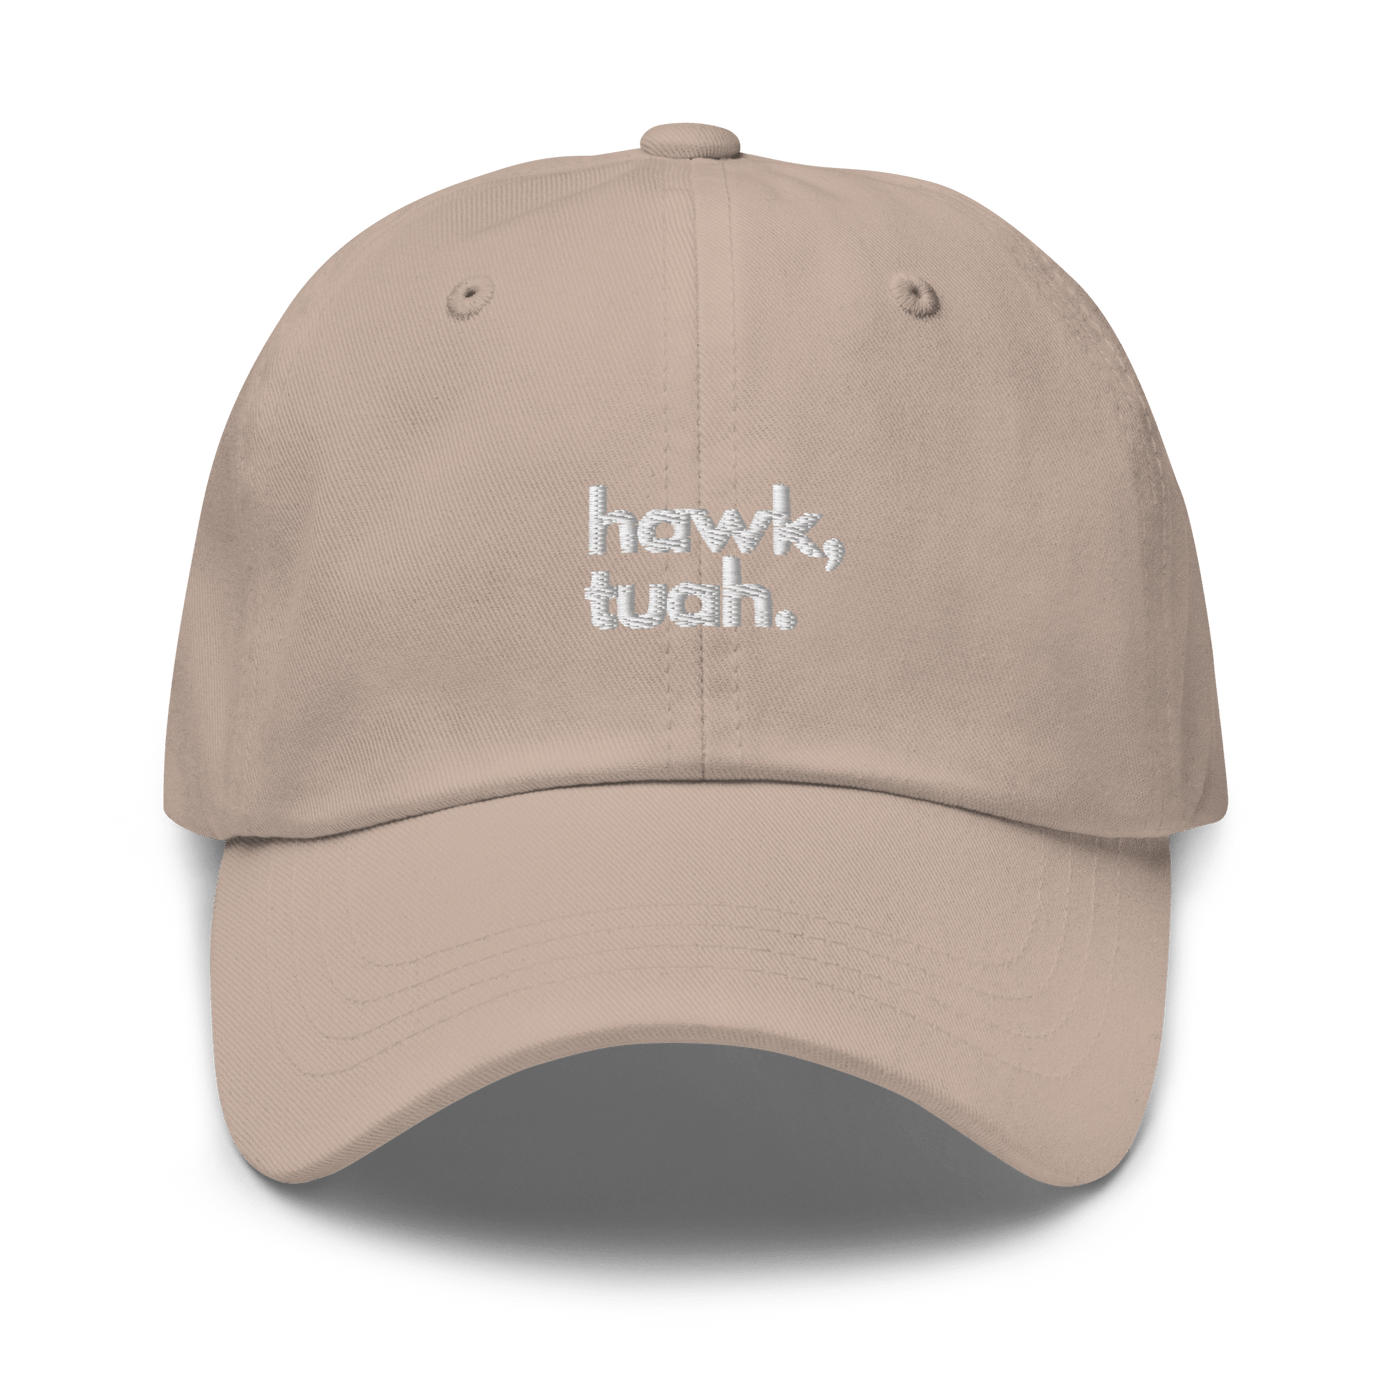 Hawk Tuah Dad hat - Stone - Just Another Cap Store